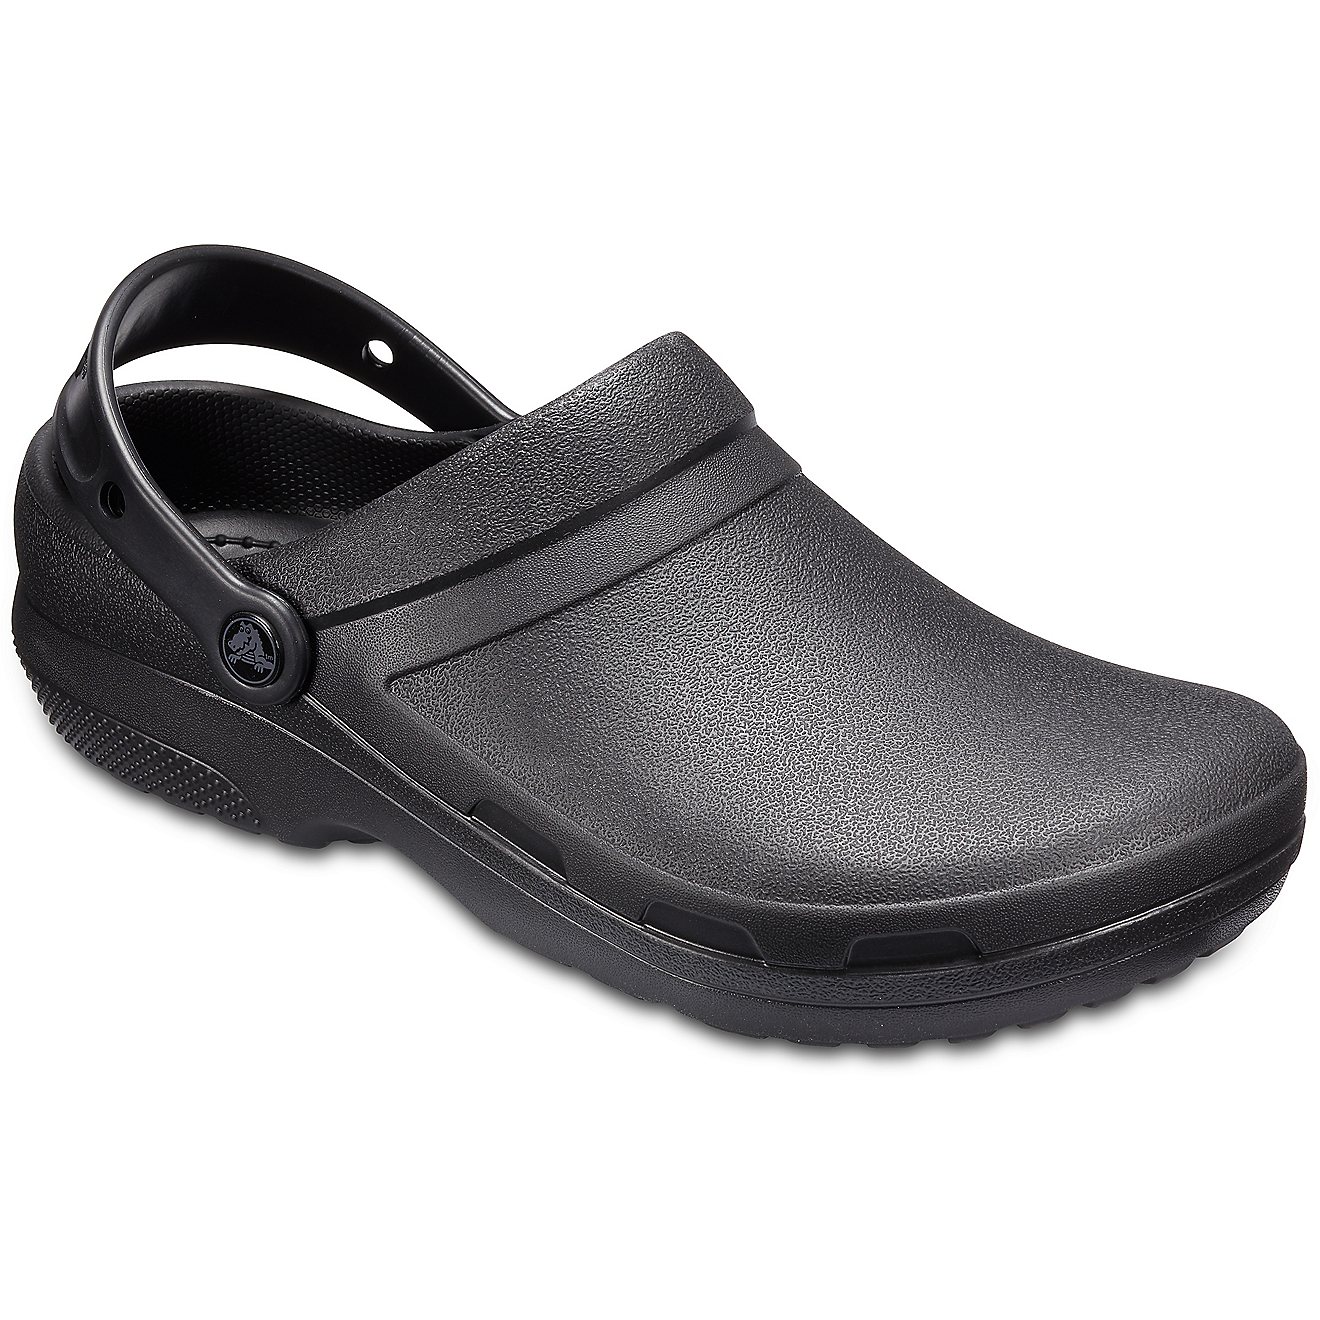 Crocs Men's Specialist II Clogs | Free Shipping at Academy